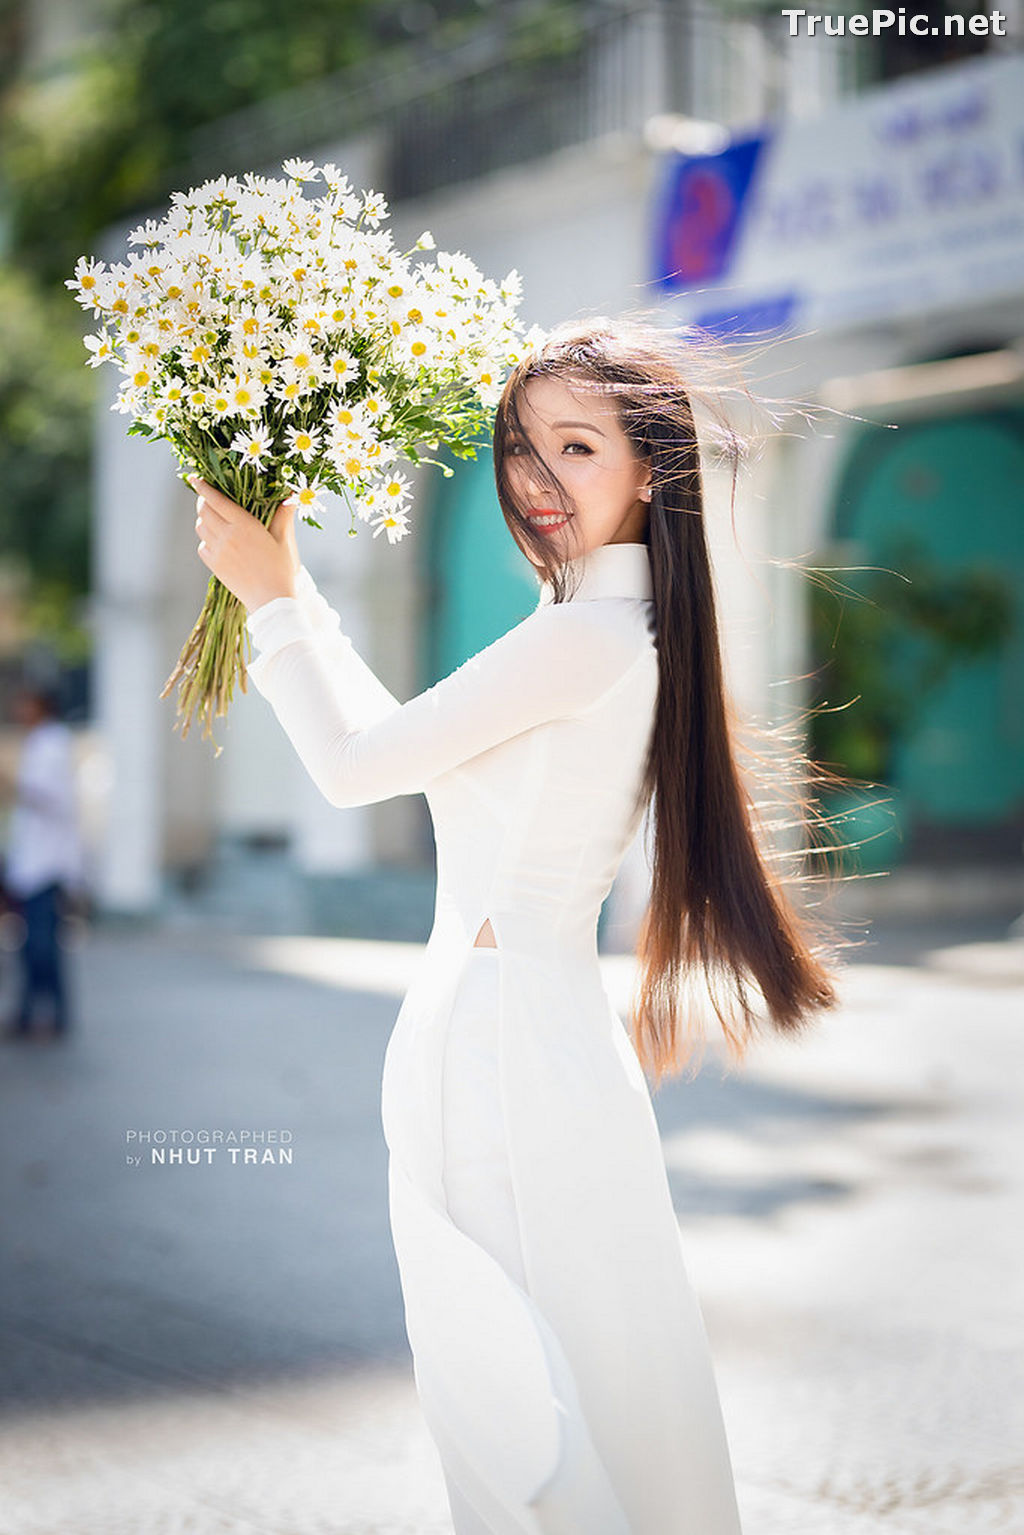 Image The Beauty of Vietnamese Girls with Traditional Dress (Ao Dai) #5 - TruePic.net - Picture-47